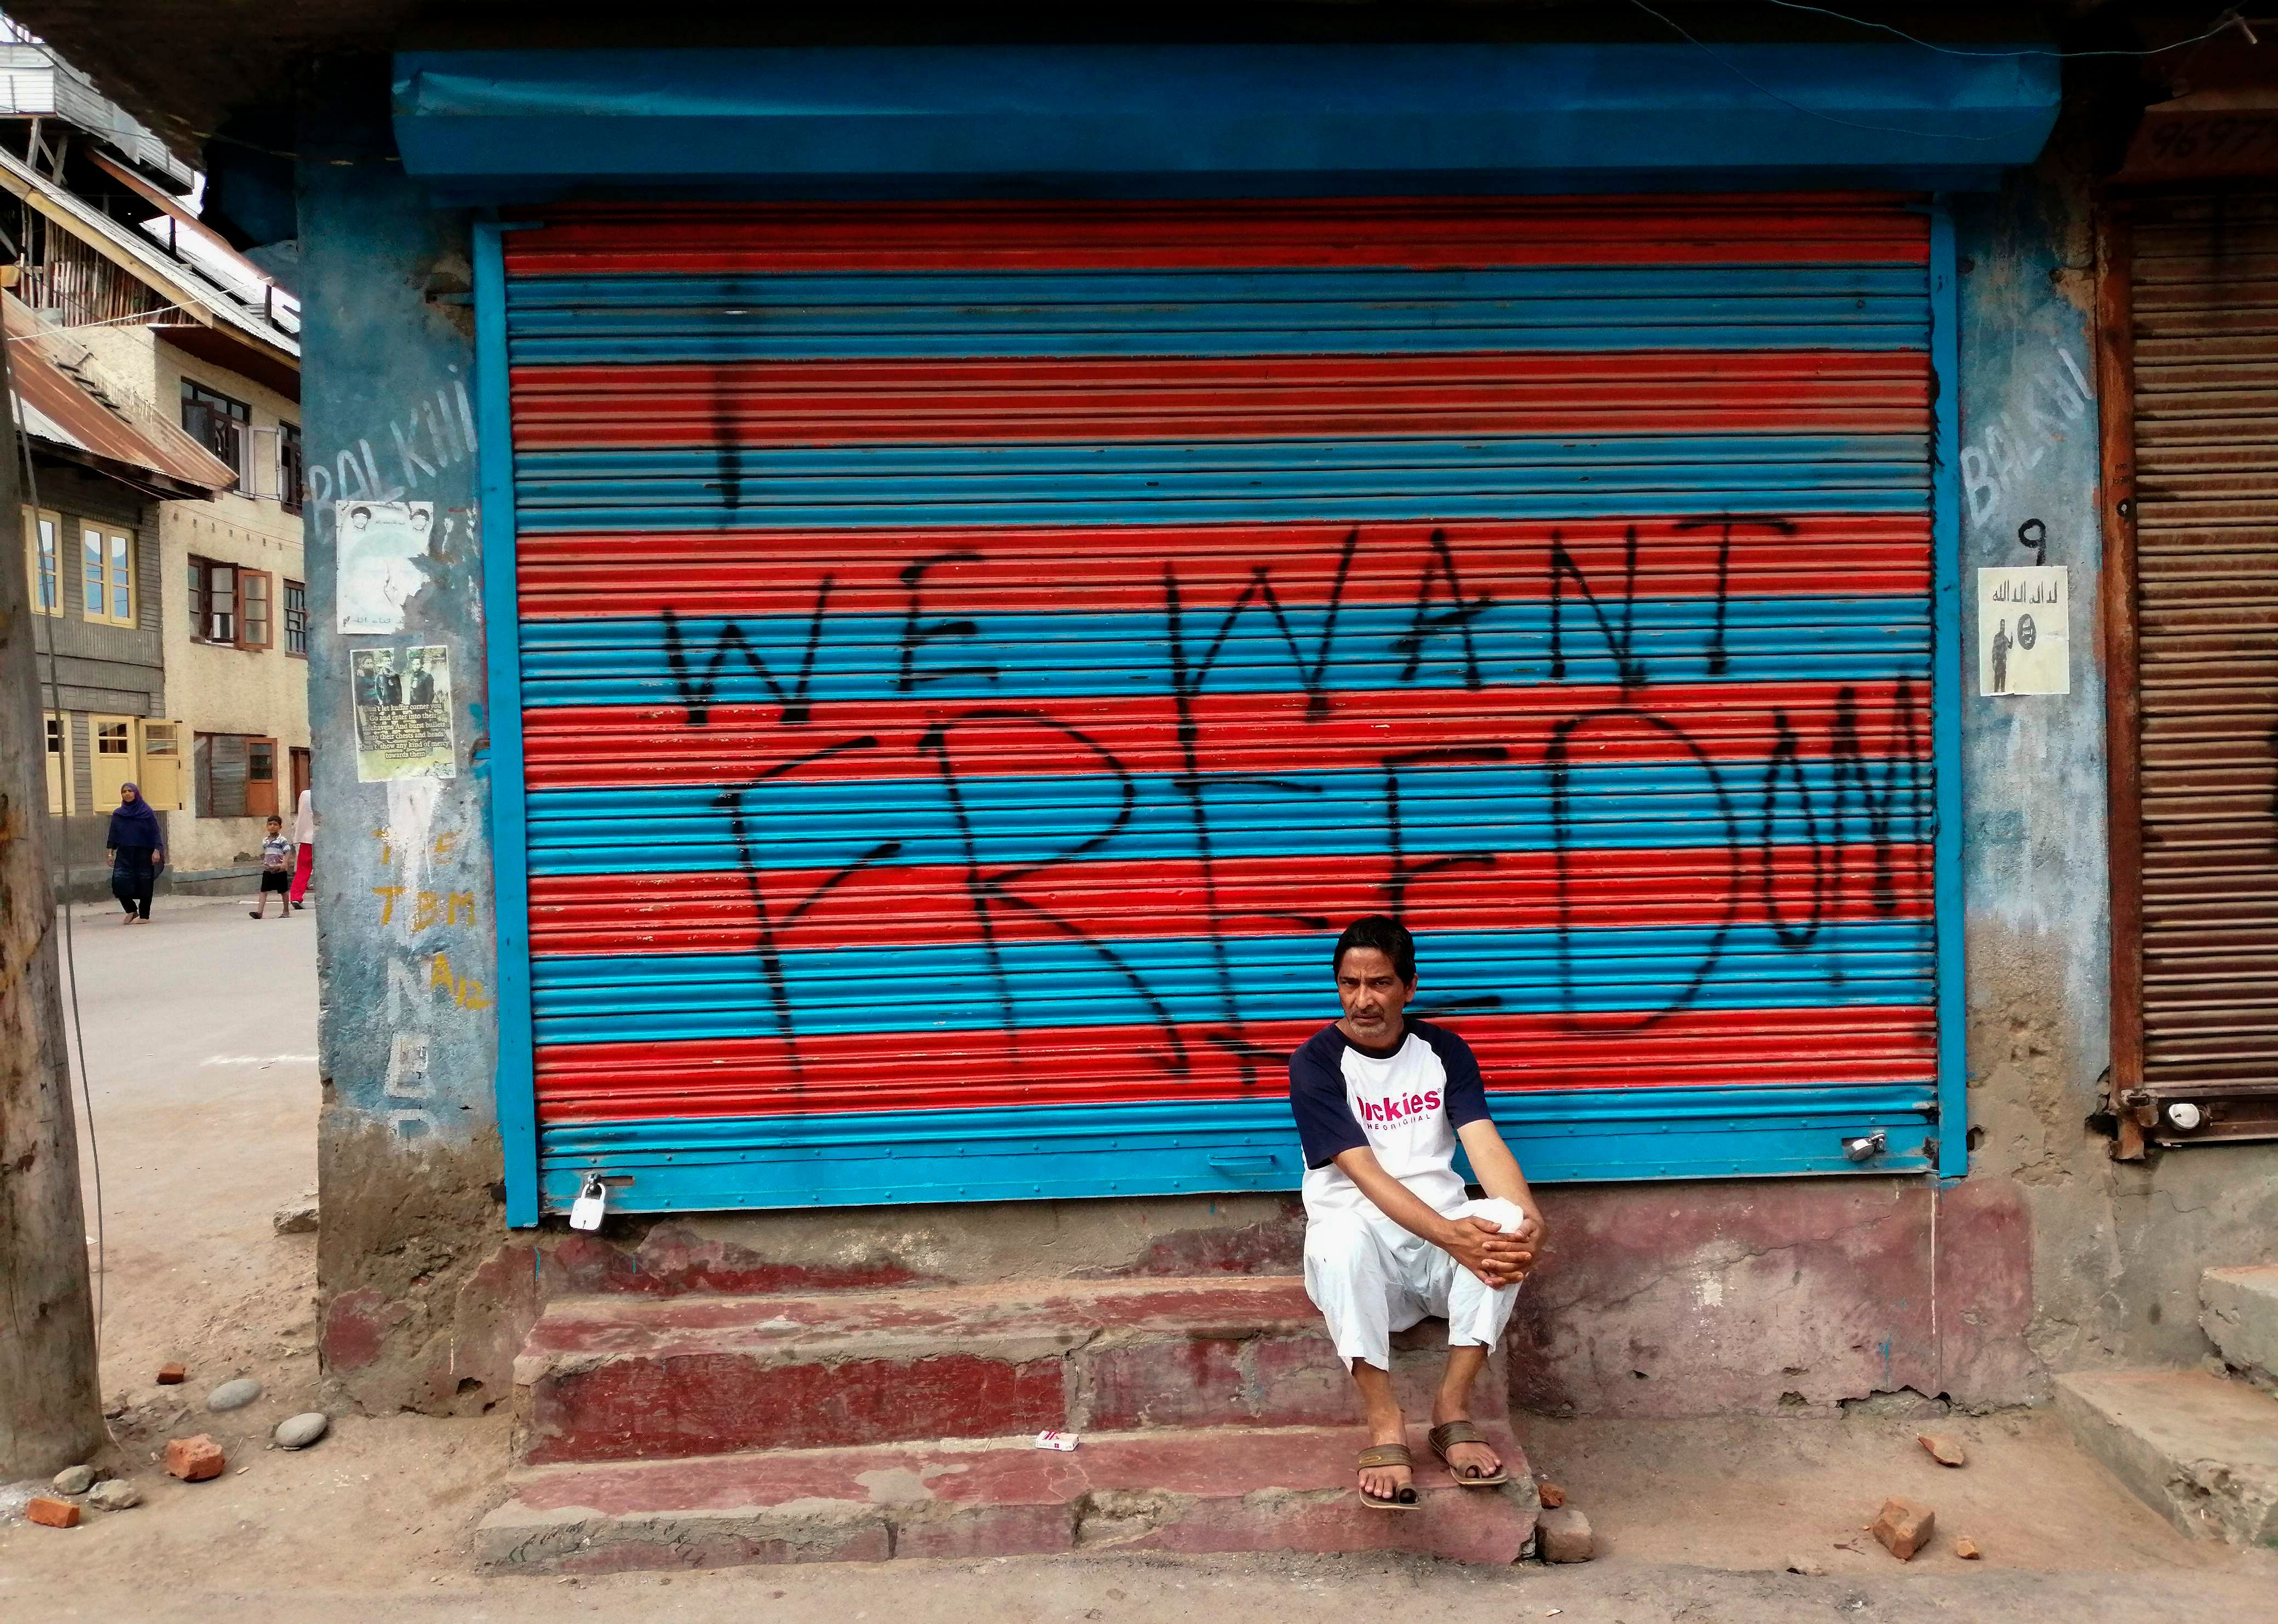  a man sits next to graffiti that reads "We Want Freedom" on a shuttered store in the Soura locality in Srinagar, during the lockdown. Photo by Jalees ANDRABI / AFP